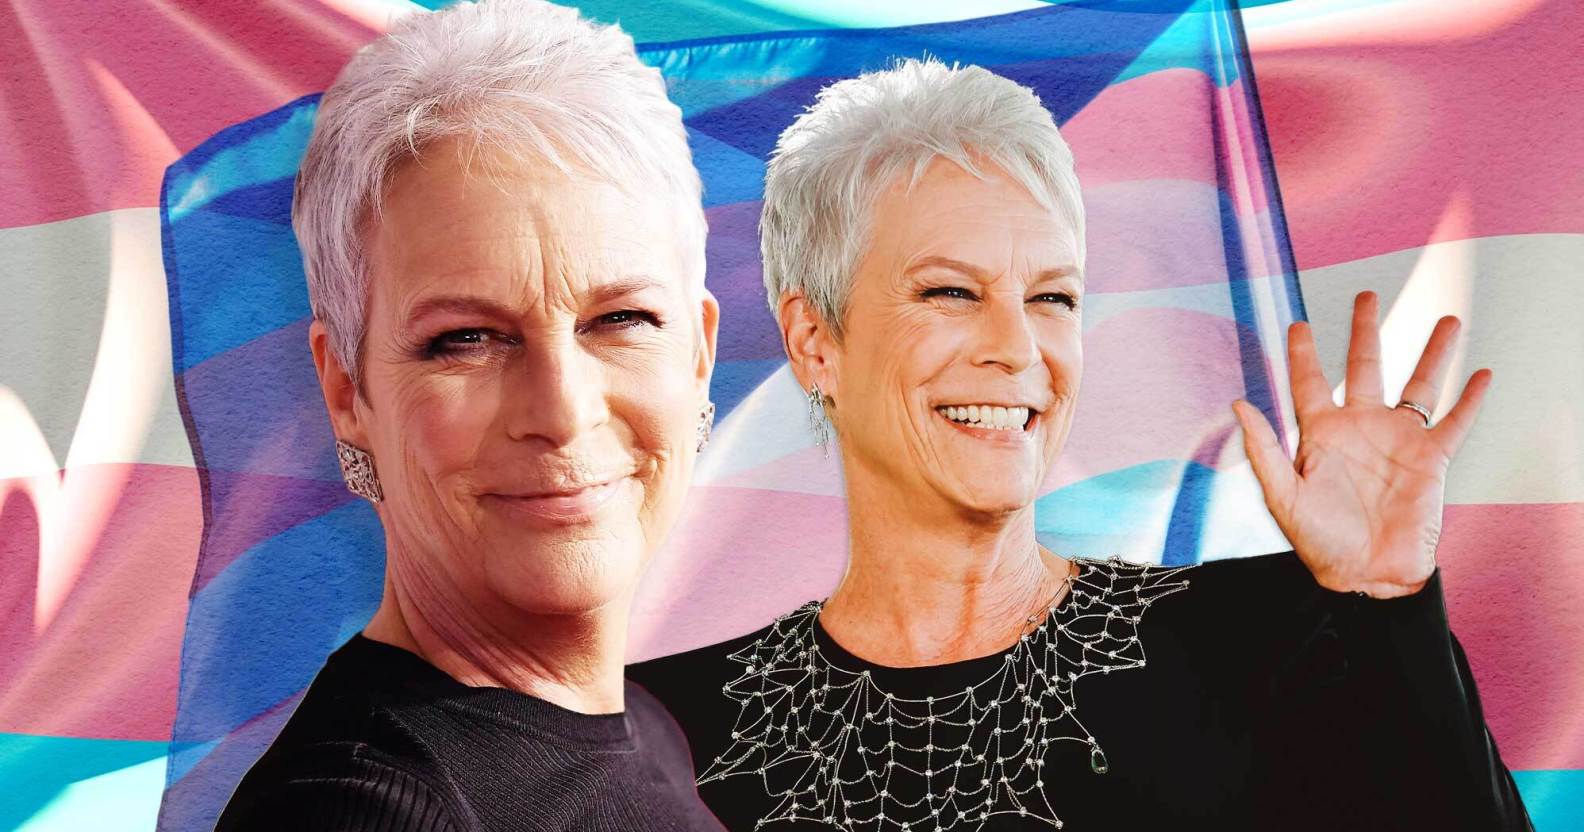 Two images of Jamie Lee Curtis smiling to the backdrop of the trans flag as the ultimate trans ally.